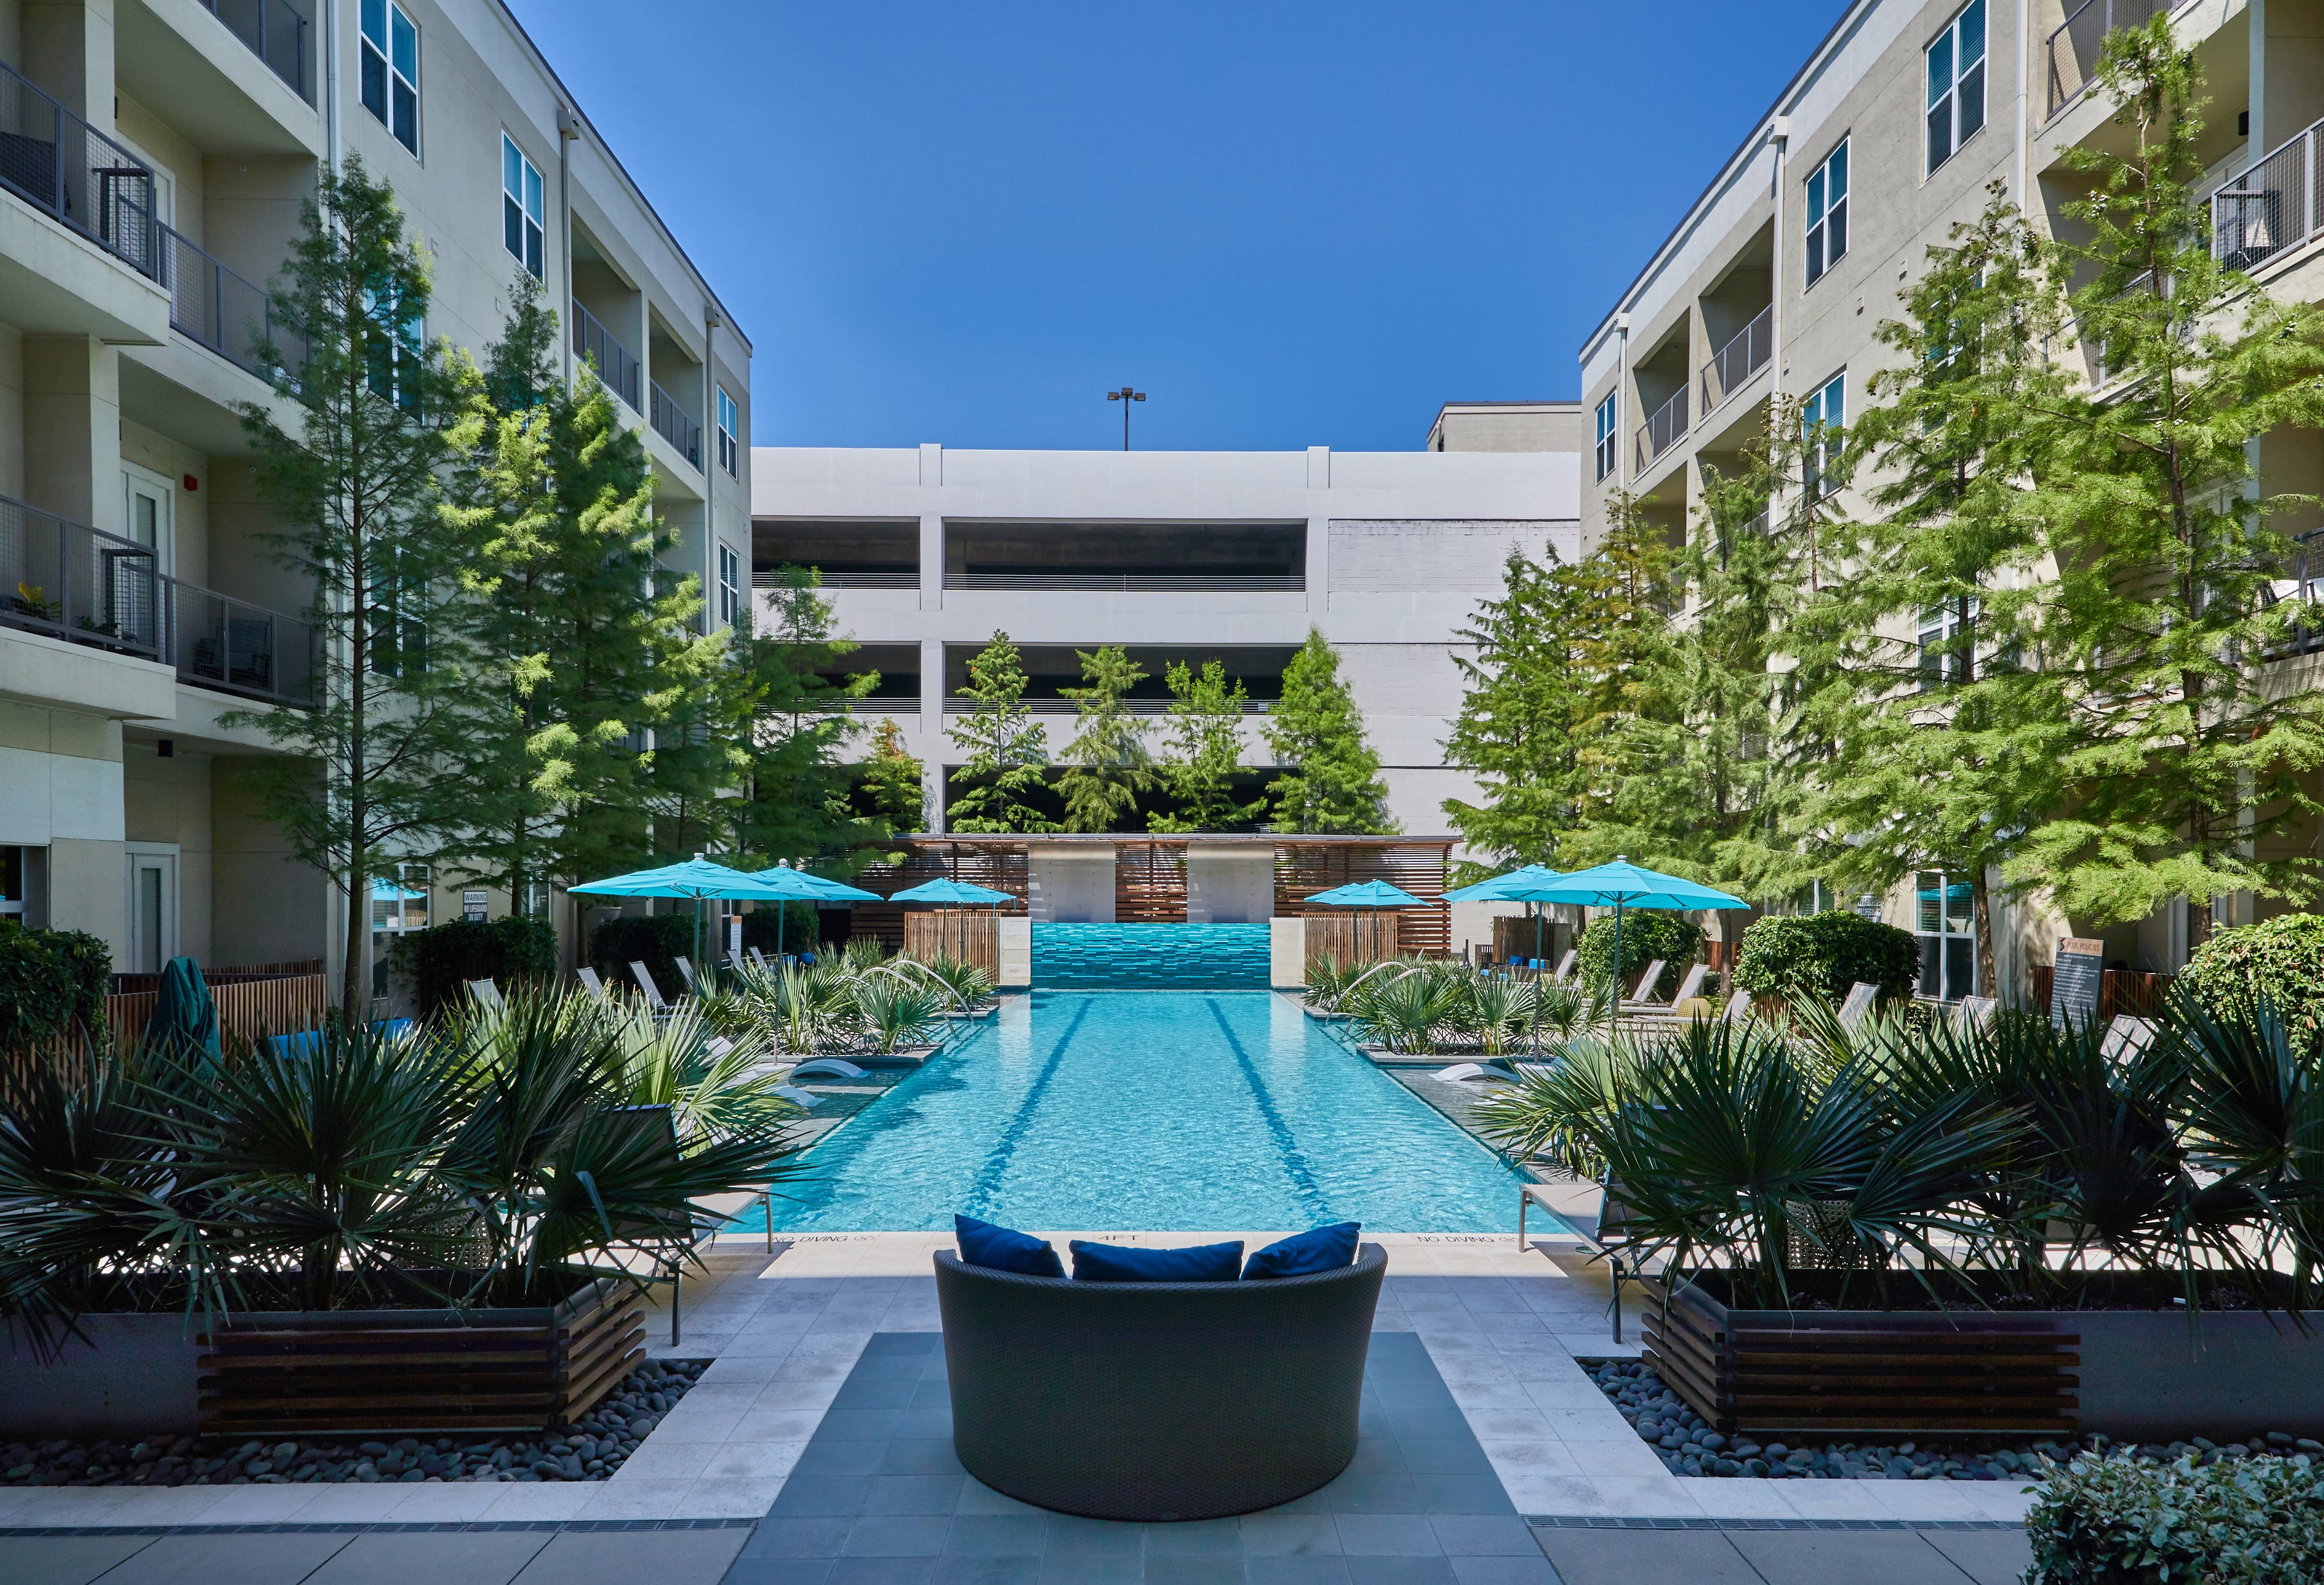 Beautiful pool area at the Standard at Cityline near Dallas surrounded by trees and lounge seating